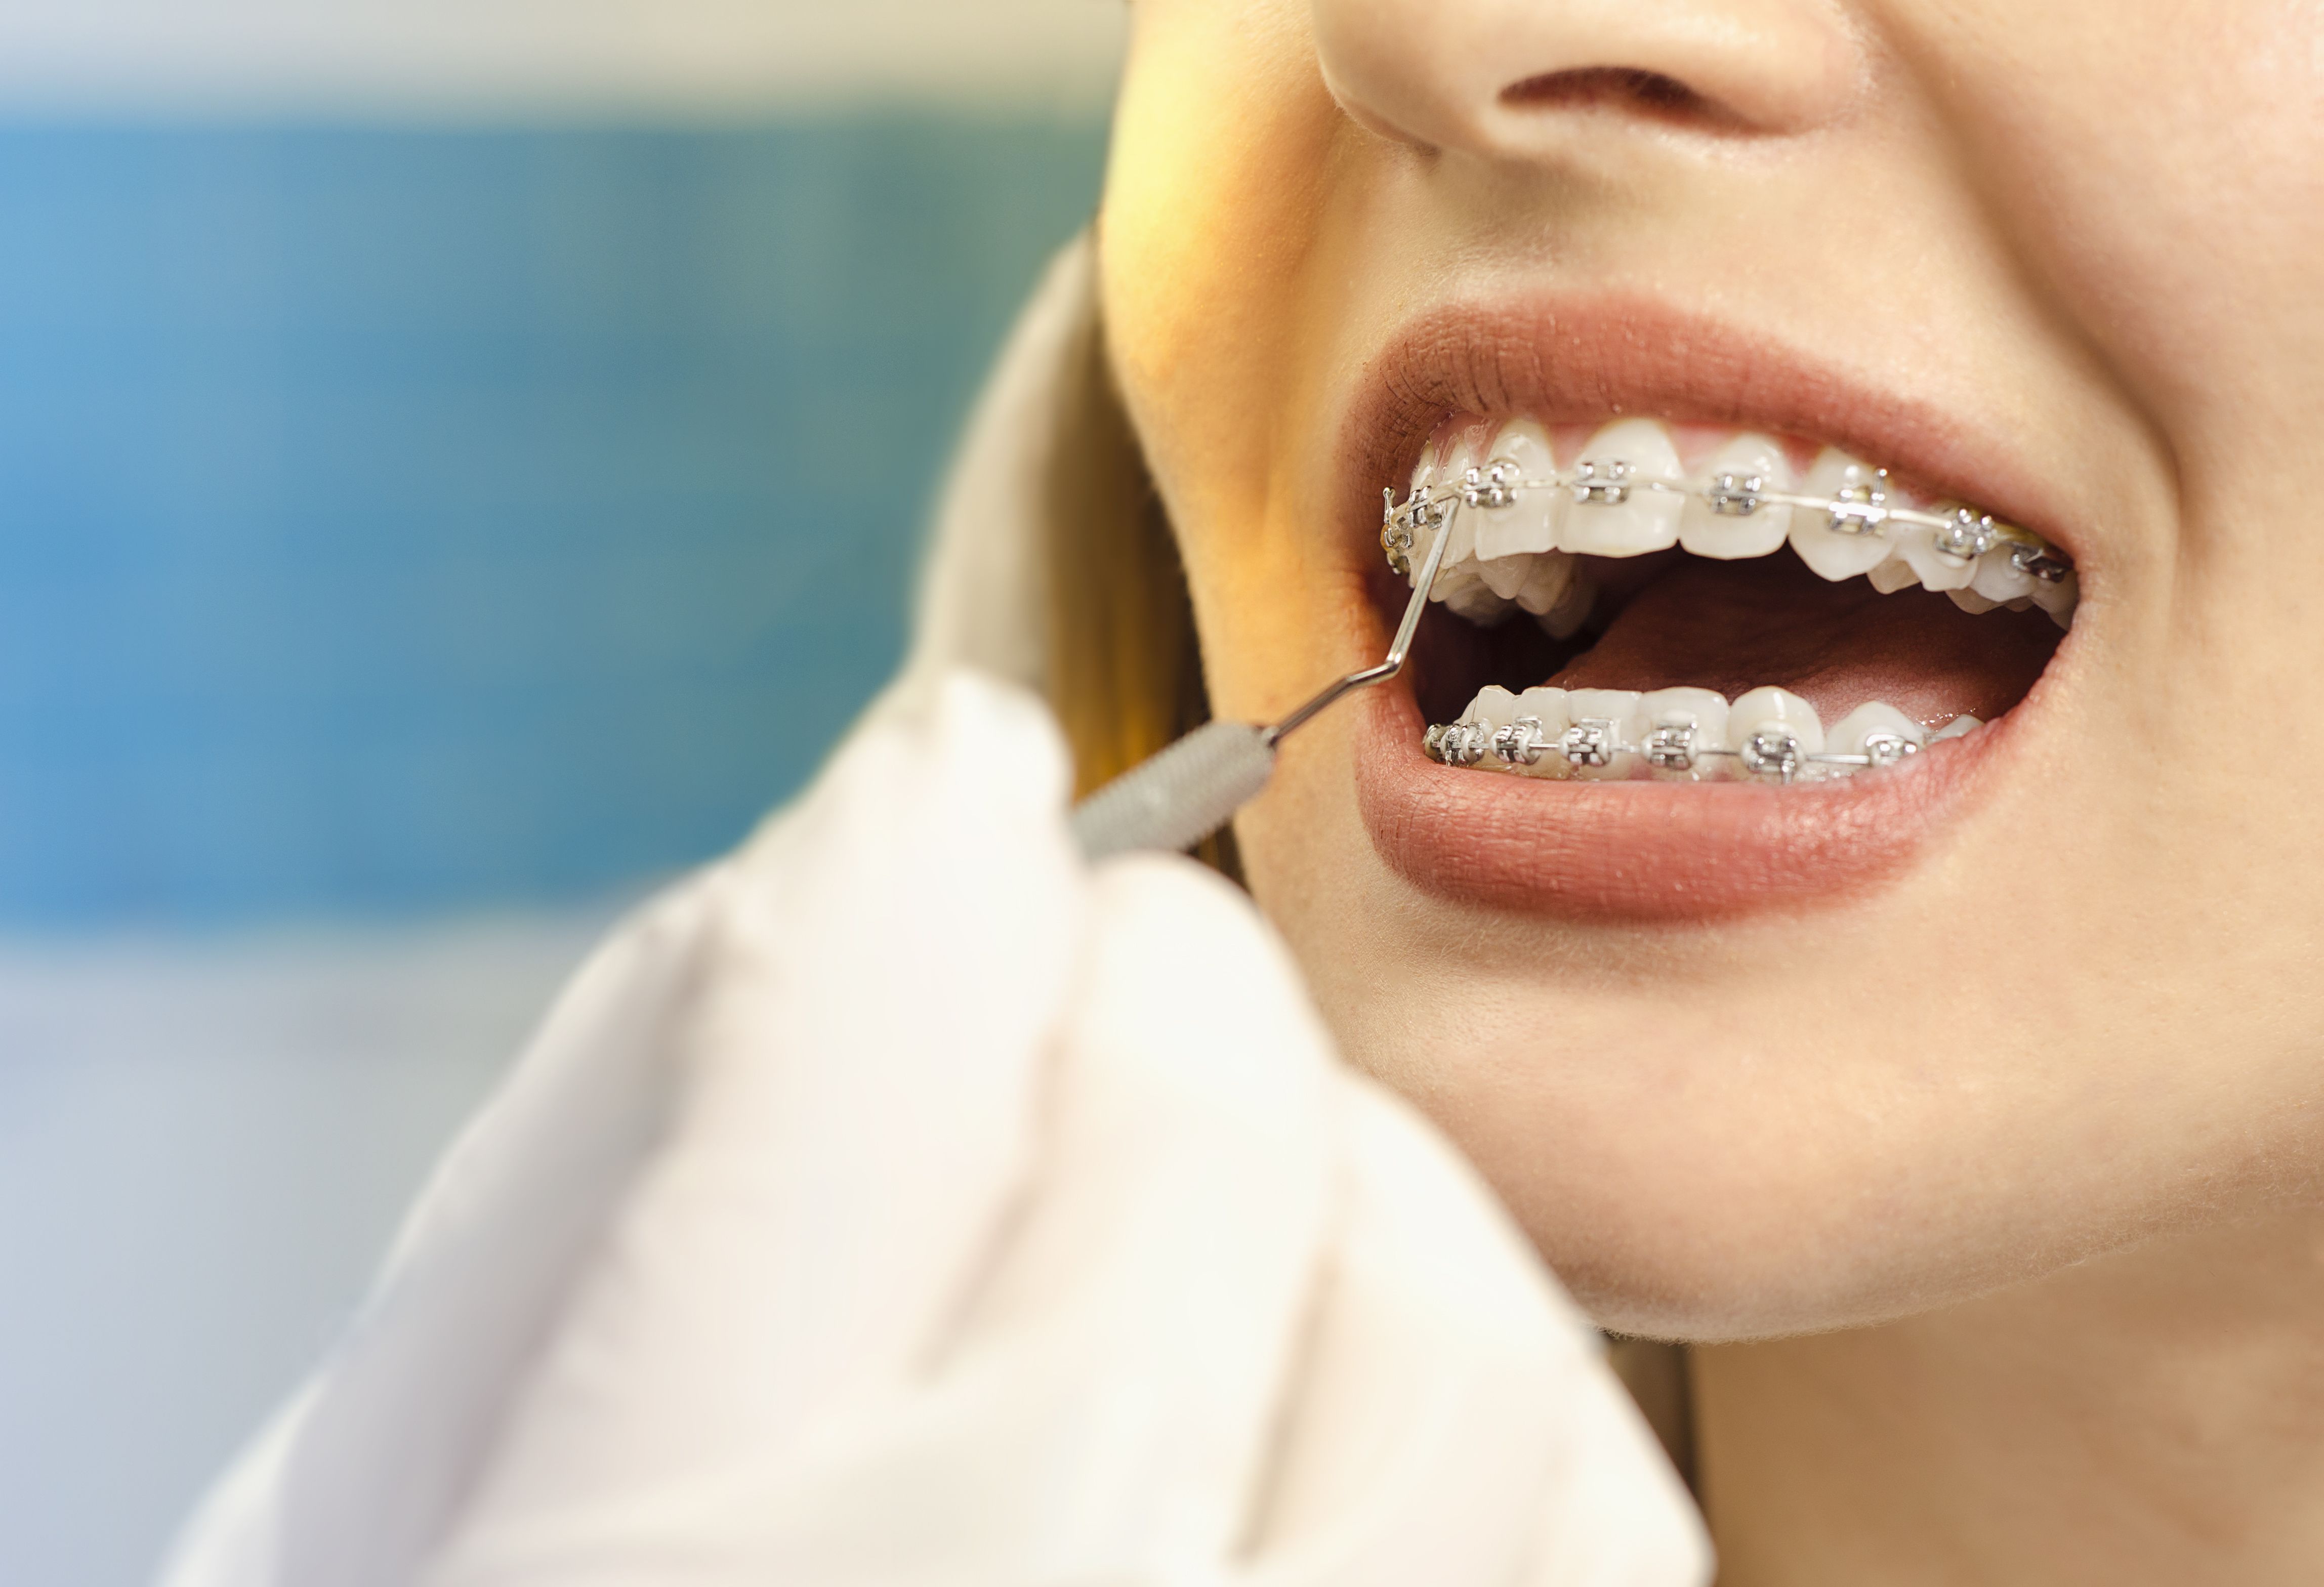 Can You Wear Braces on Your Top Teeth Only?